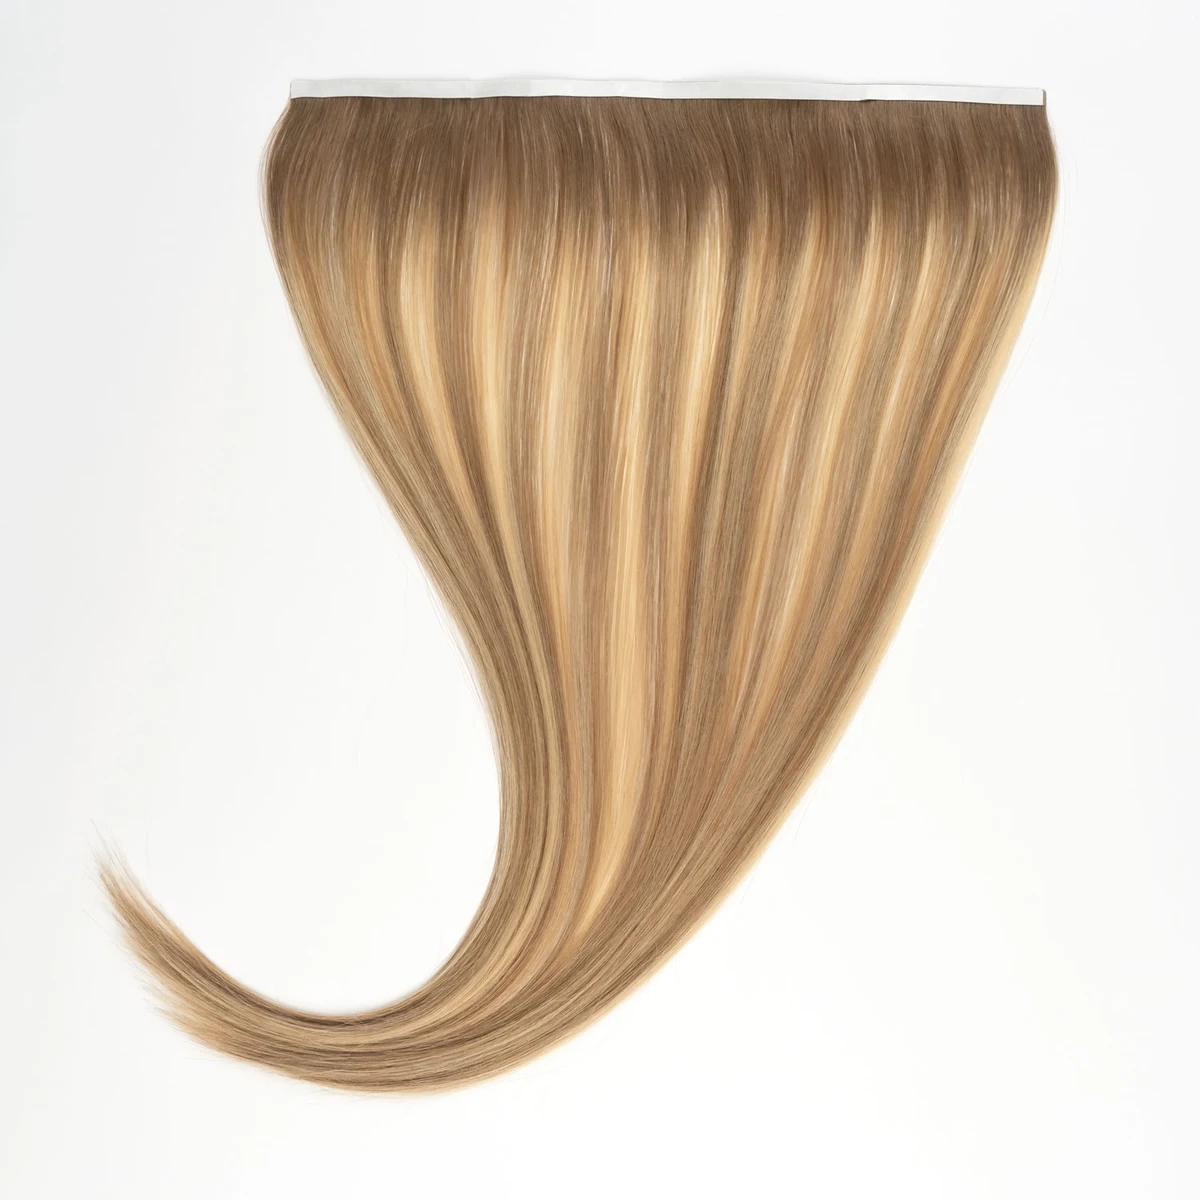 Easihair Pro Extensions | Undetectable Tape Row